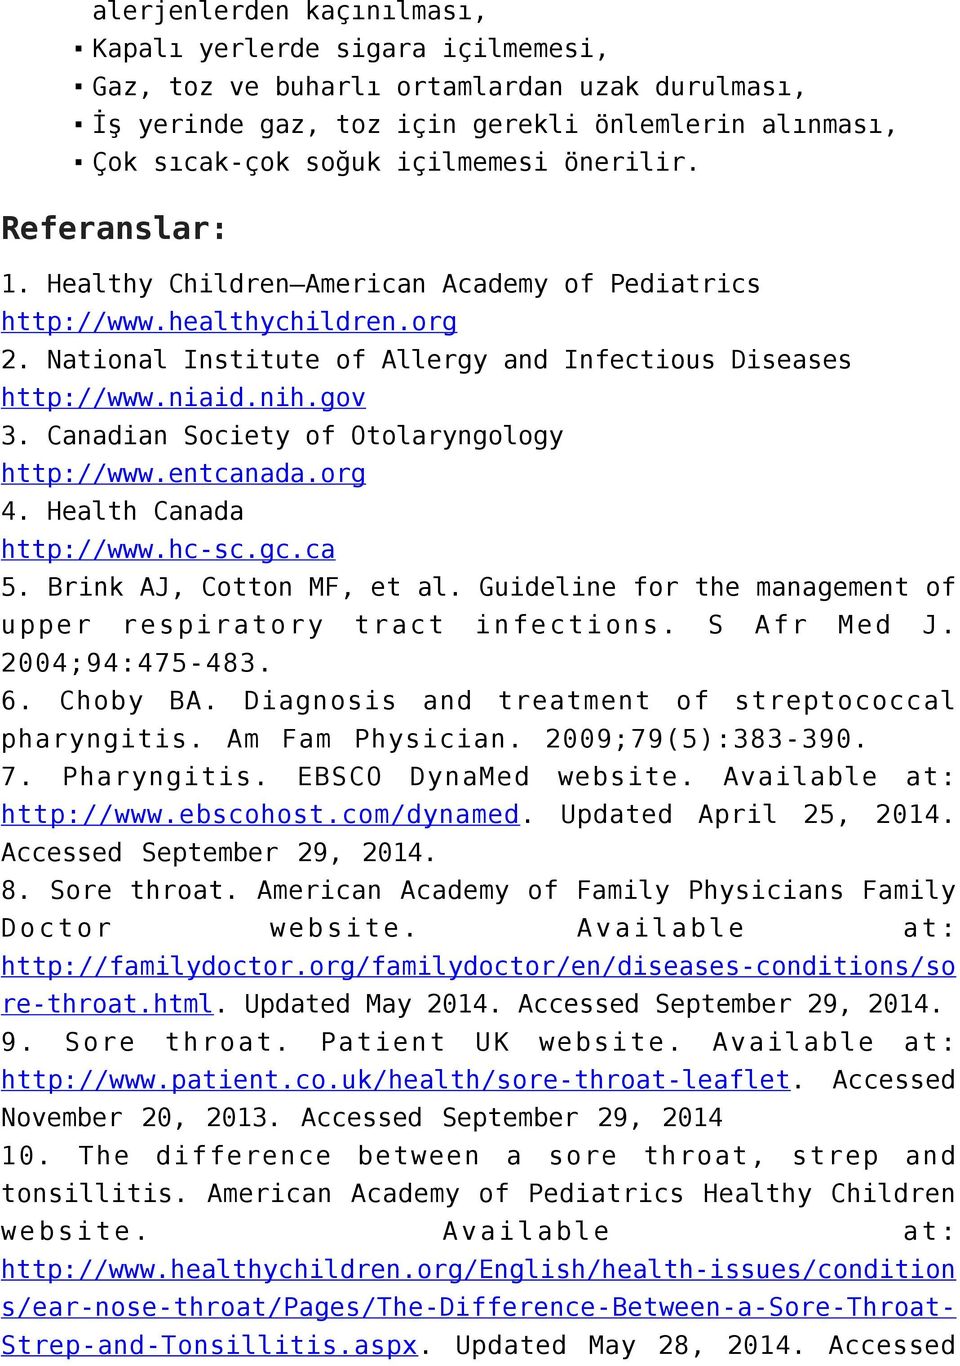 Canadian Society of Otolaryngology http://www.entcanada.org 4. Health Canada http://www.hc-sc.gc.ca 5. Brink AJ, Cotton MF, et al. Guideline for the management of upper respiratory tract infections.